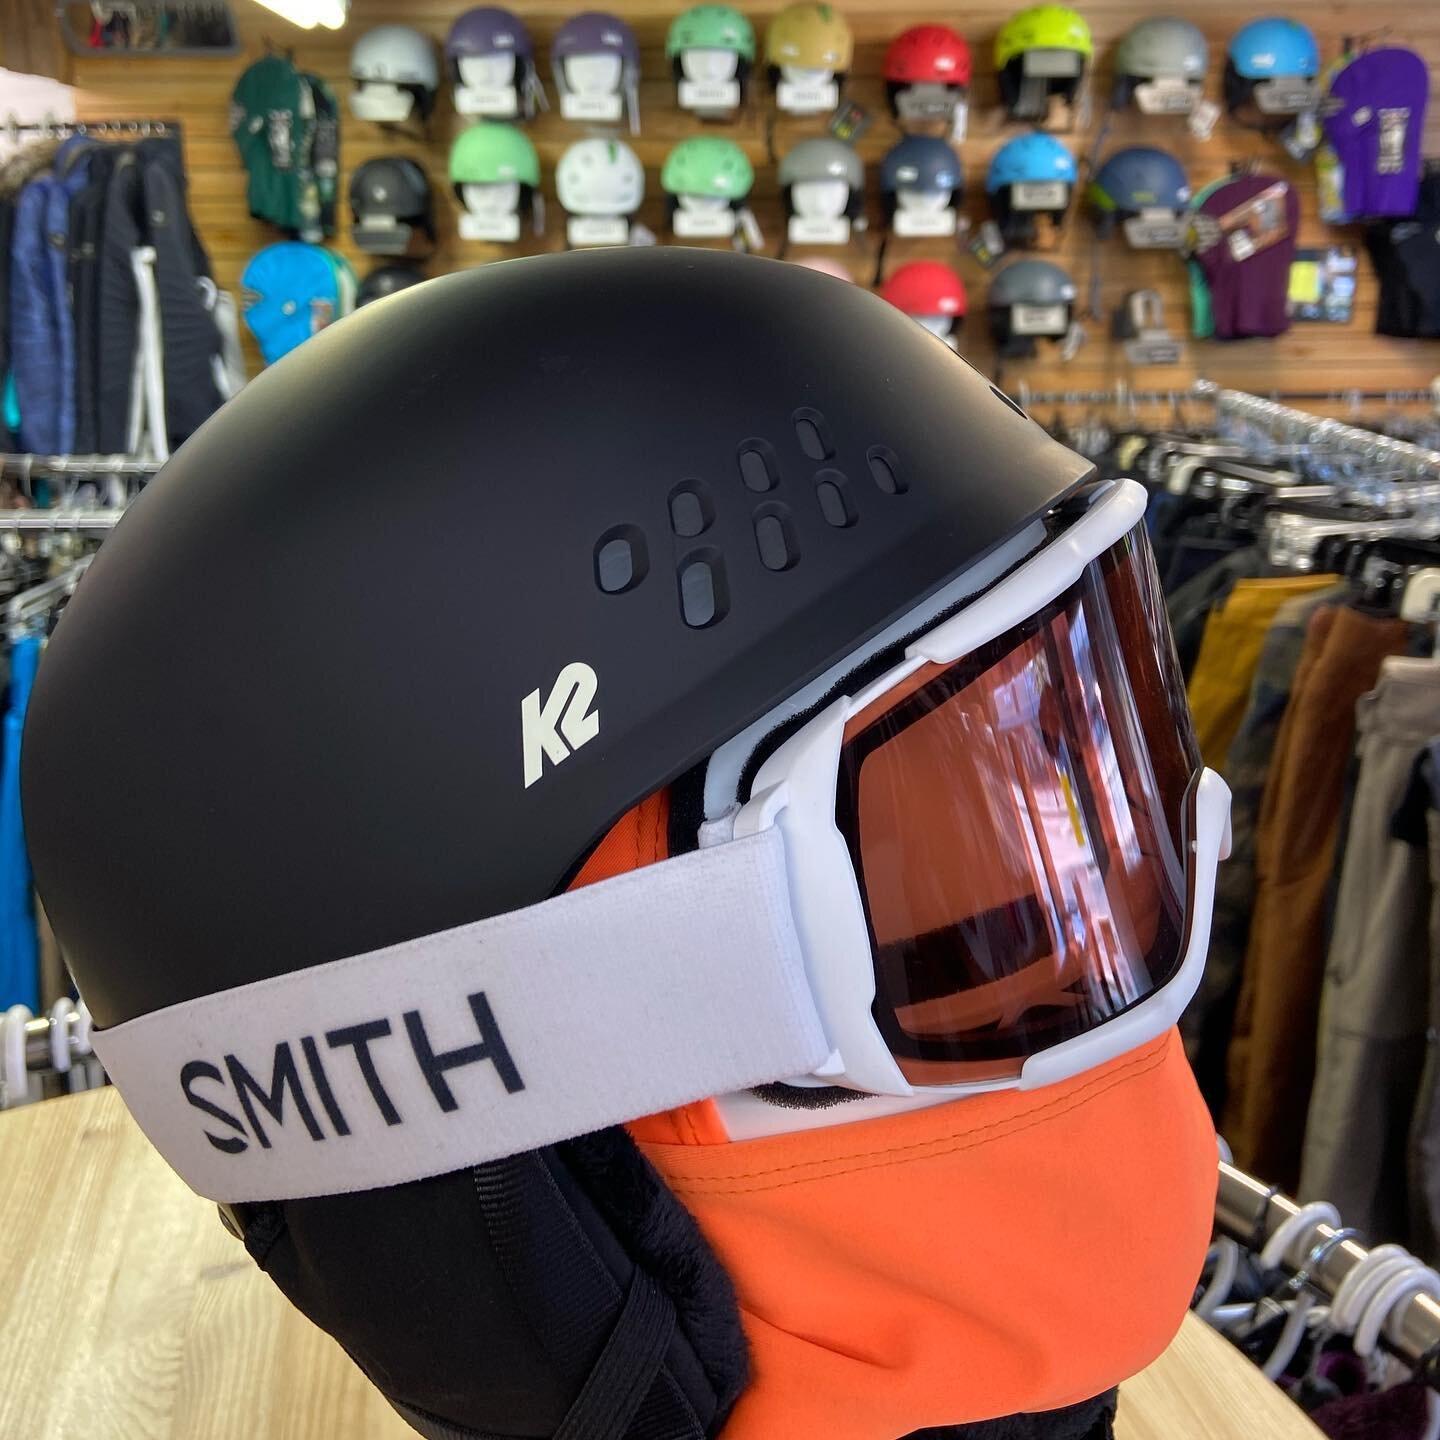 HELMET CLASS! Get you kids in and sign them up for our helmet class!! $35 gets the kids a helmet and a helmet safety class put on by Dr. Brent Driks.